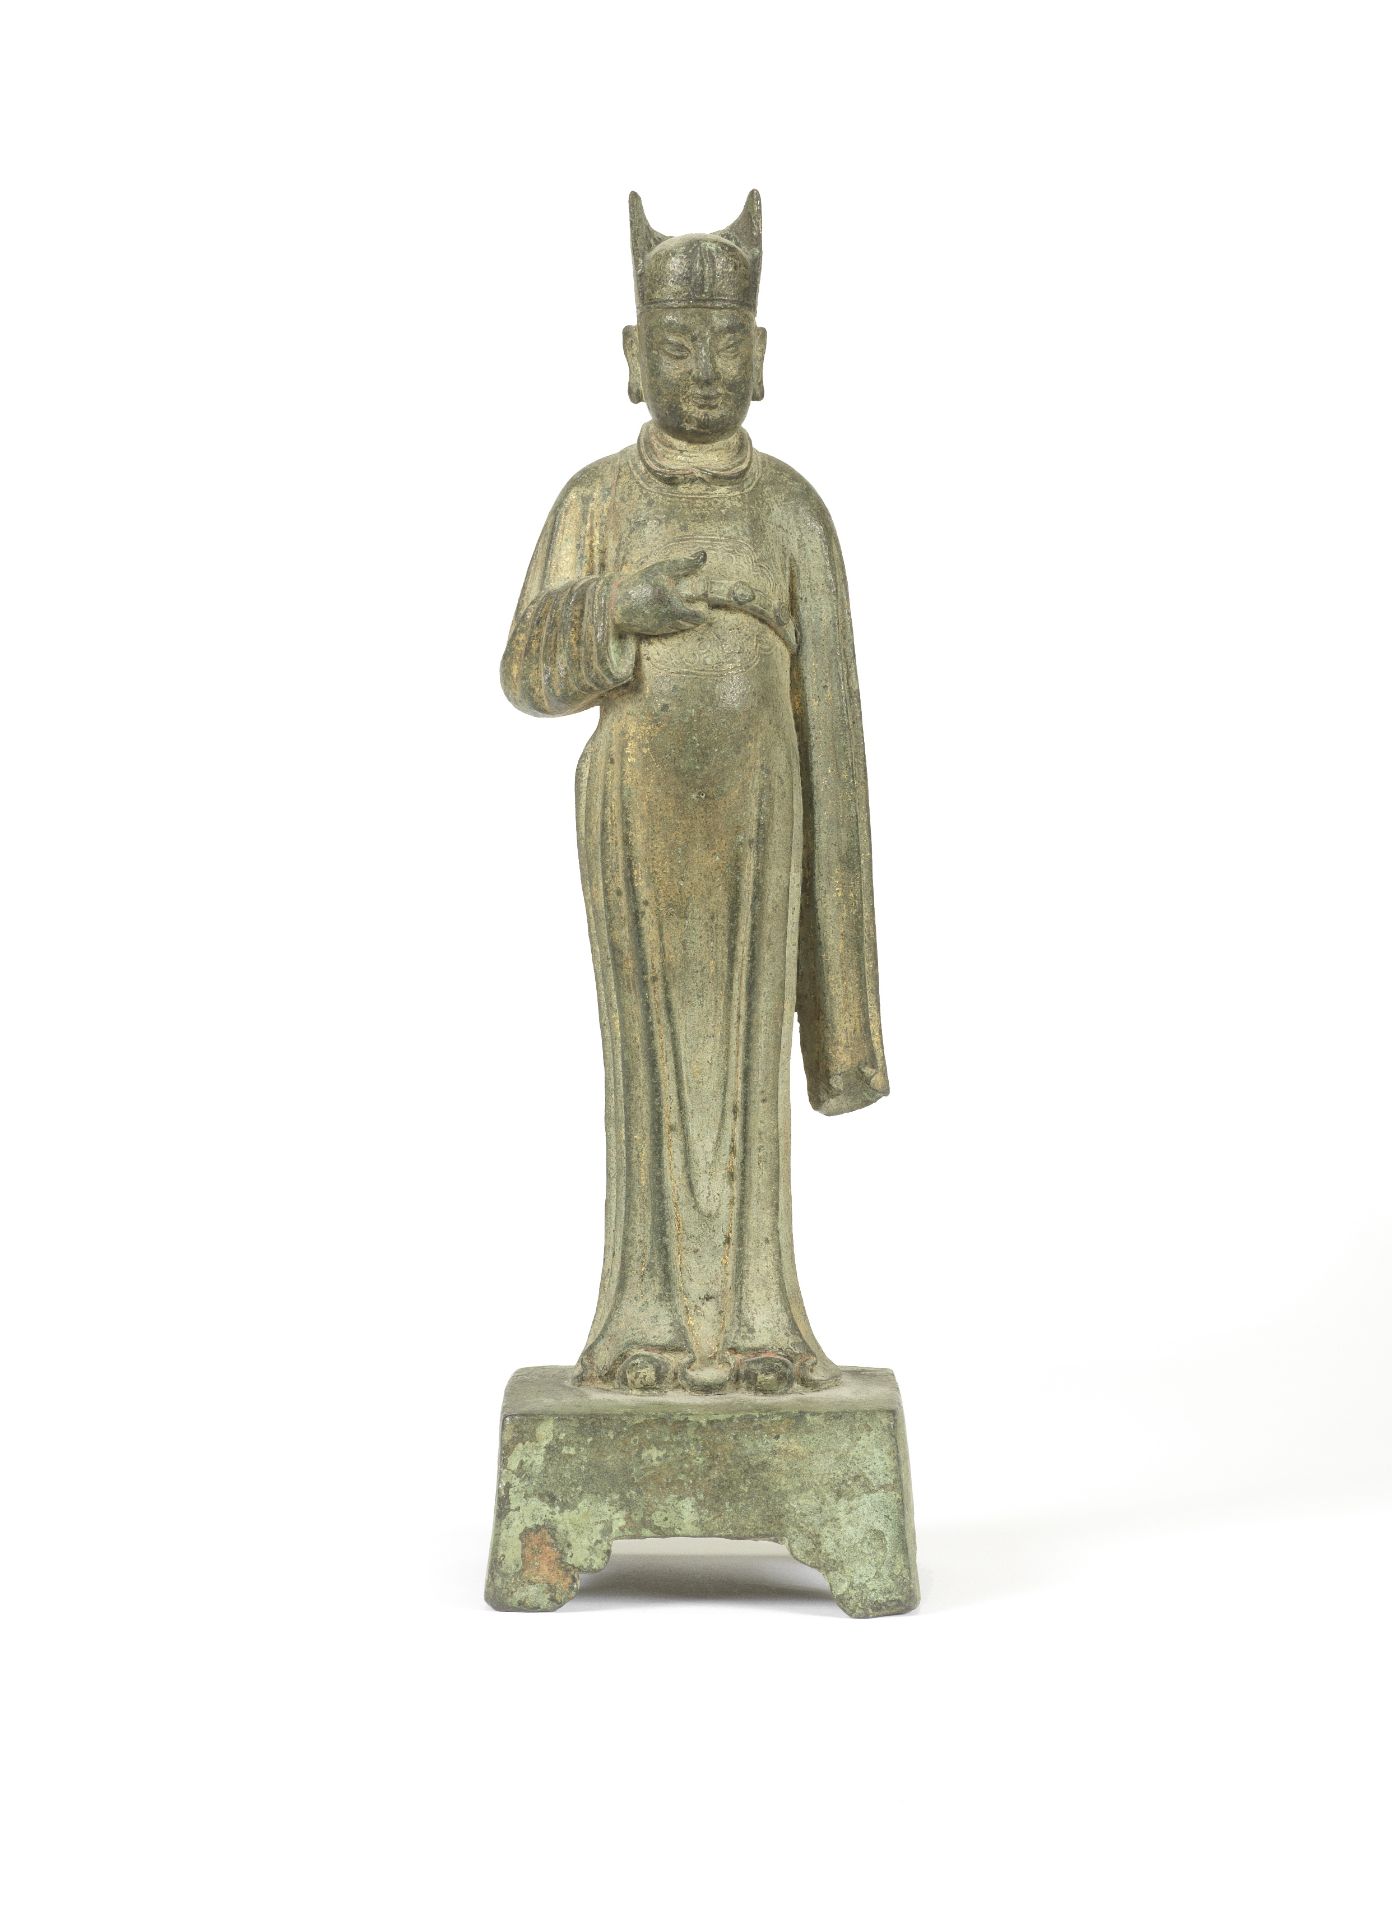 A RARE BRONZE FIGURE OF AN OFFICIAL Mid Ming Dynasty